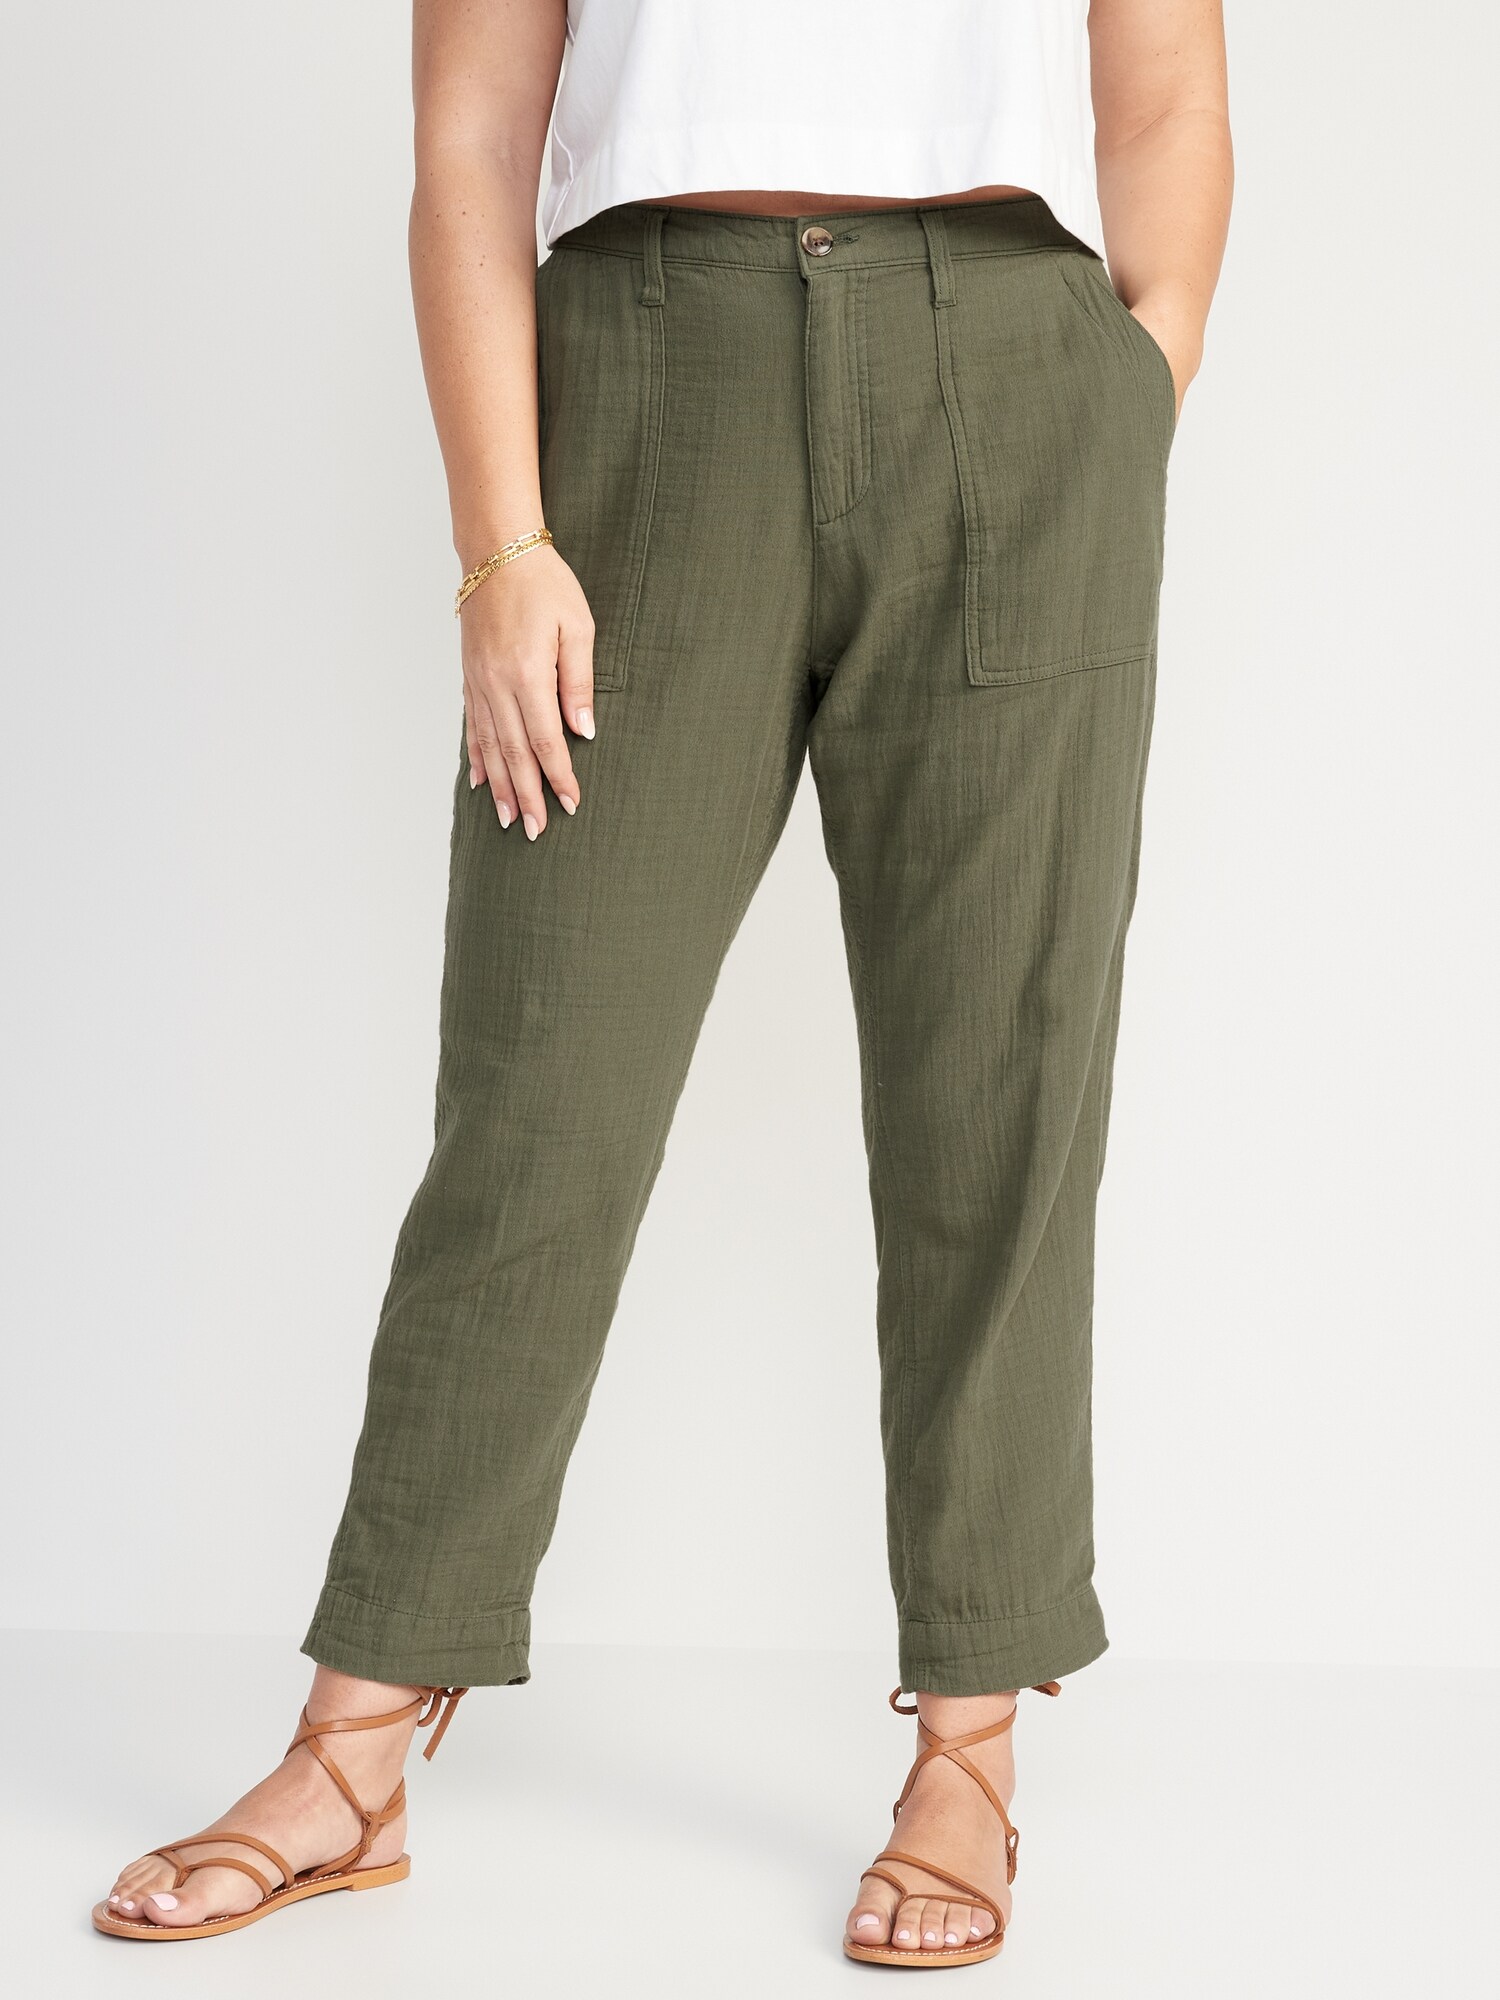 How to Wear the Tapered Workwear Pants from Old Navy